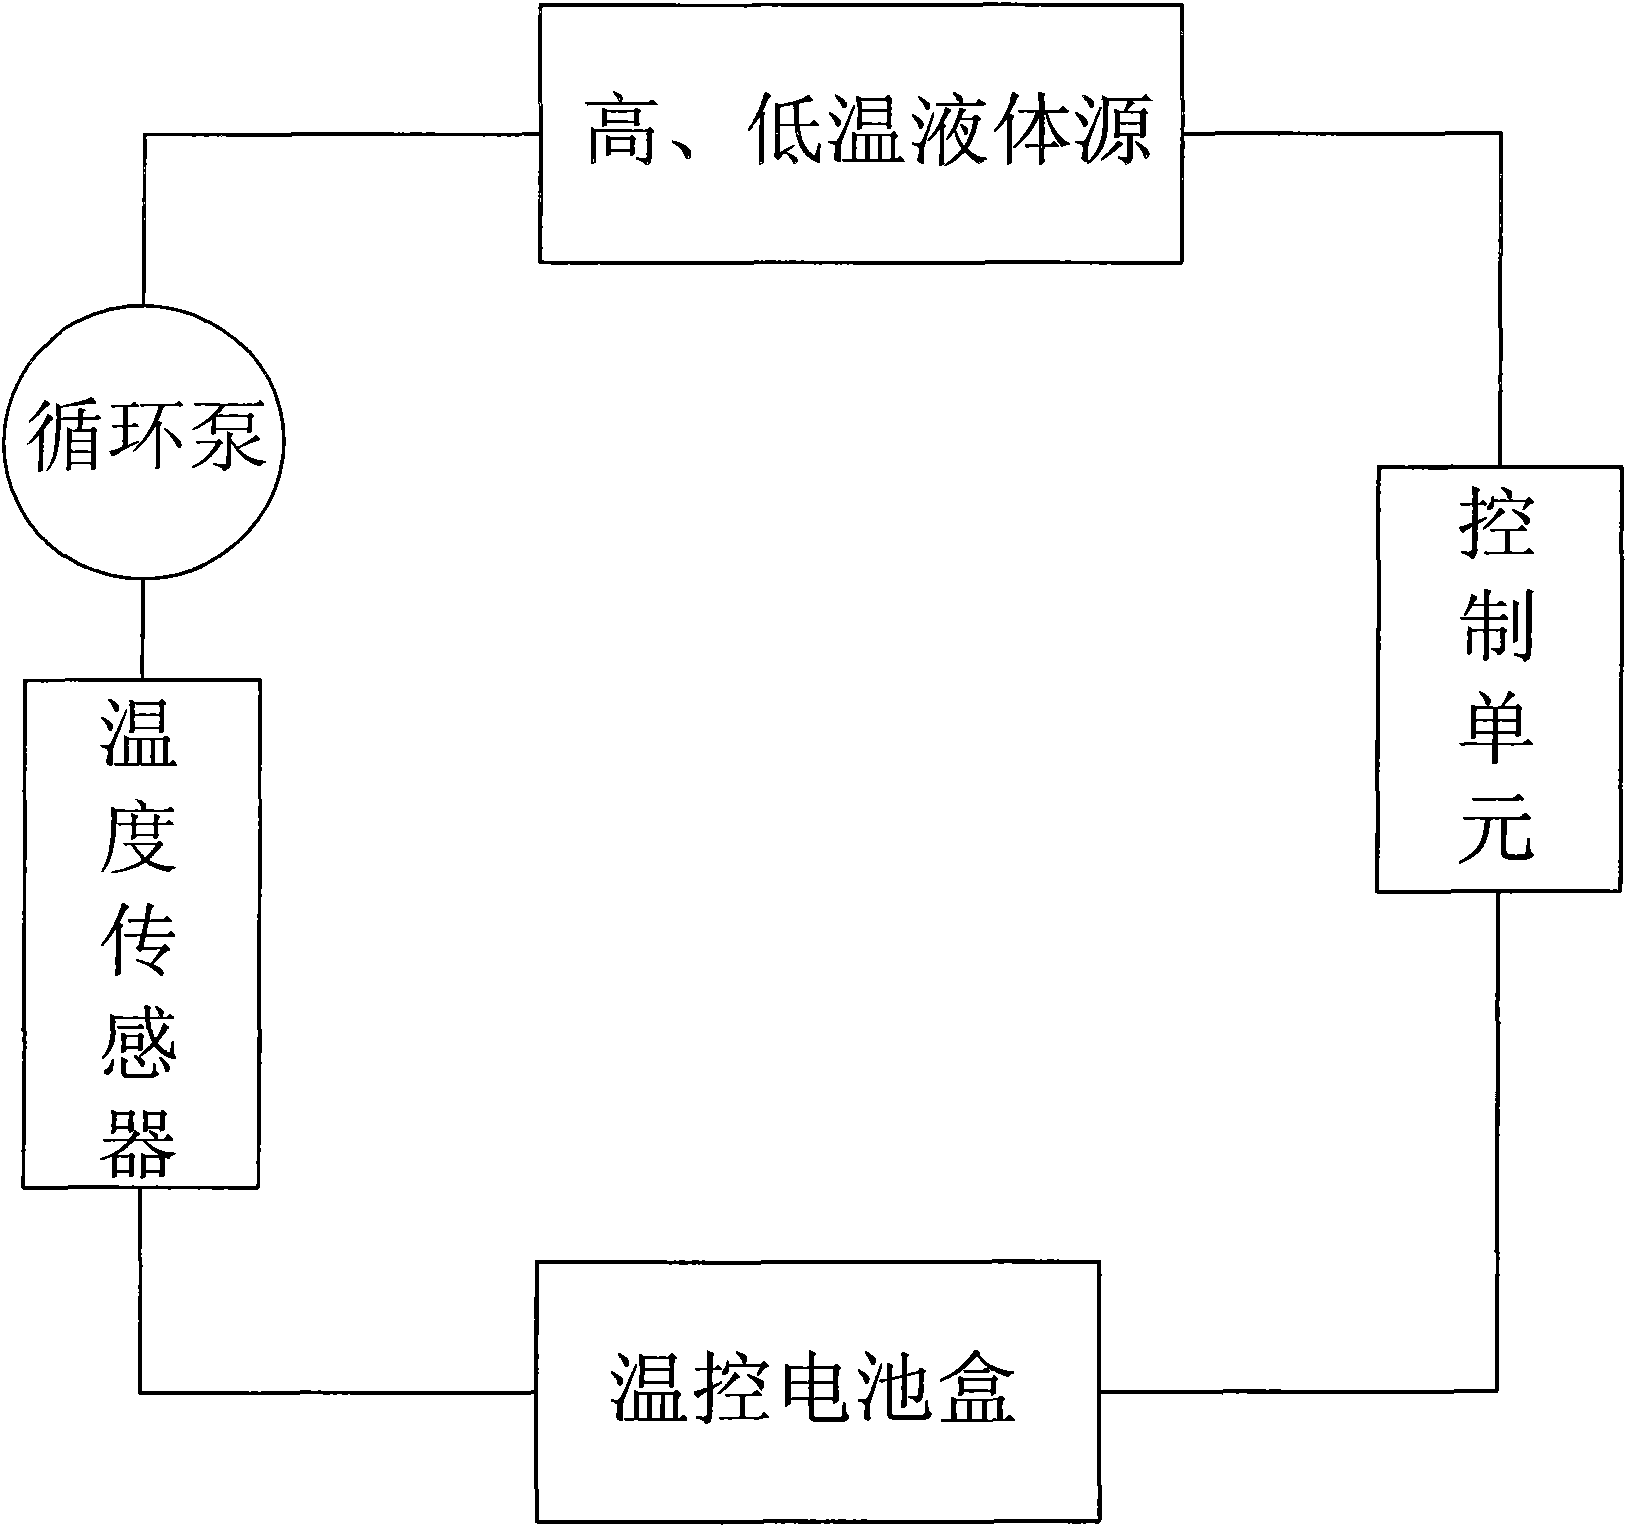 Power lithium battery temperature control device